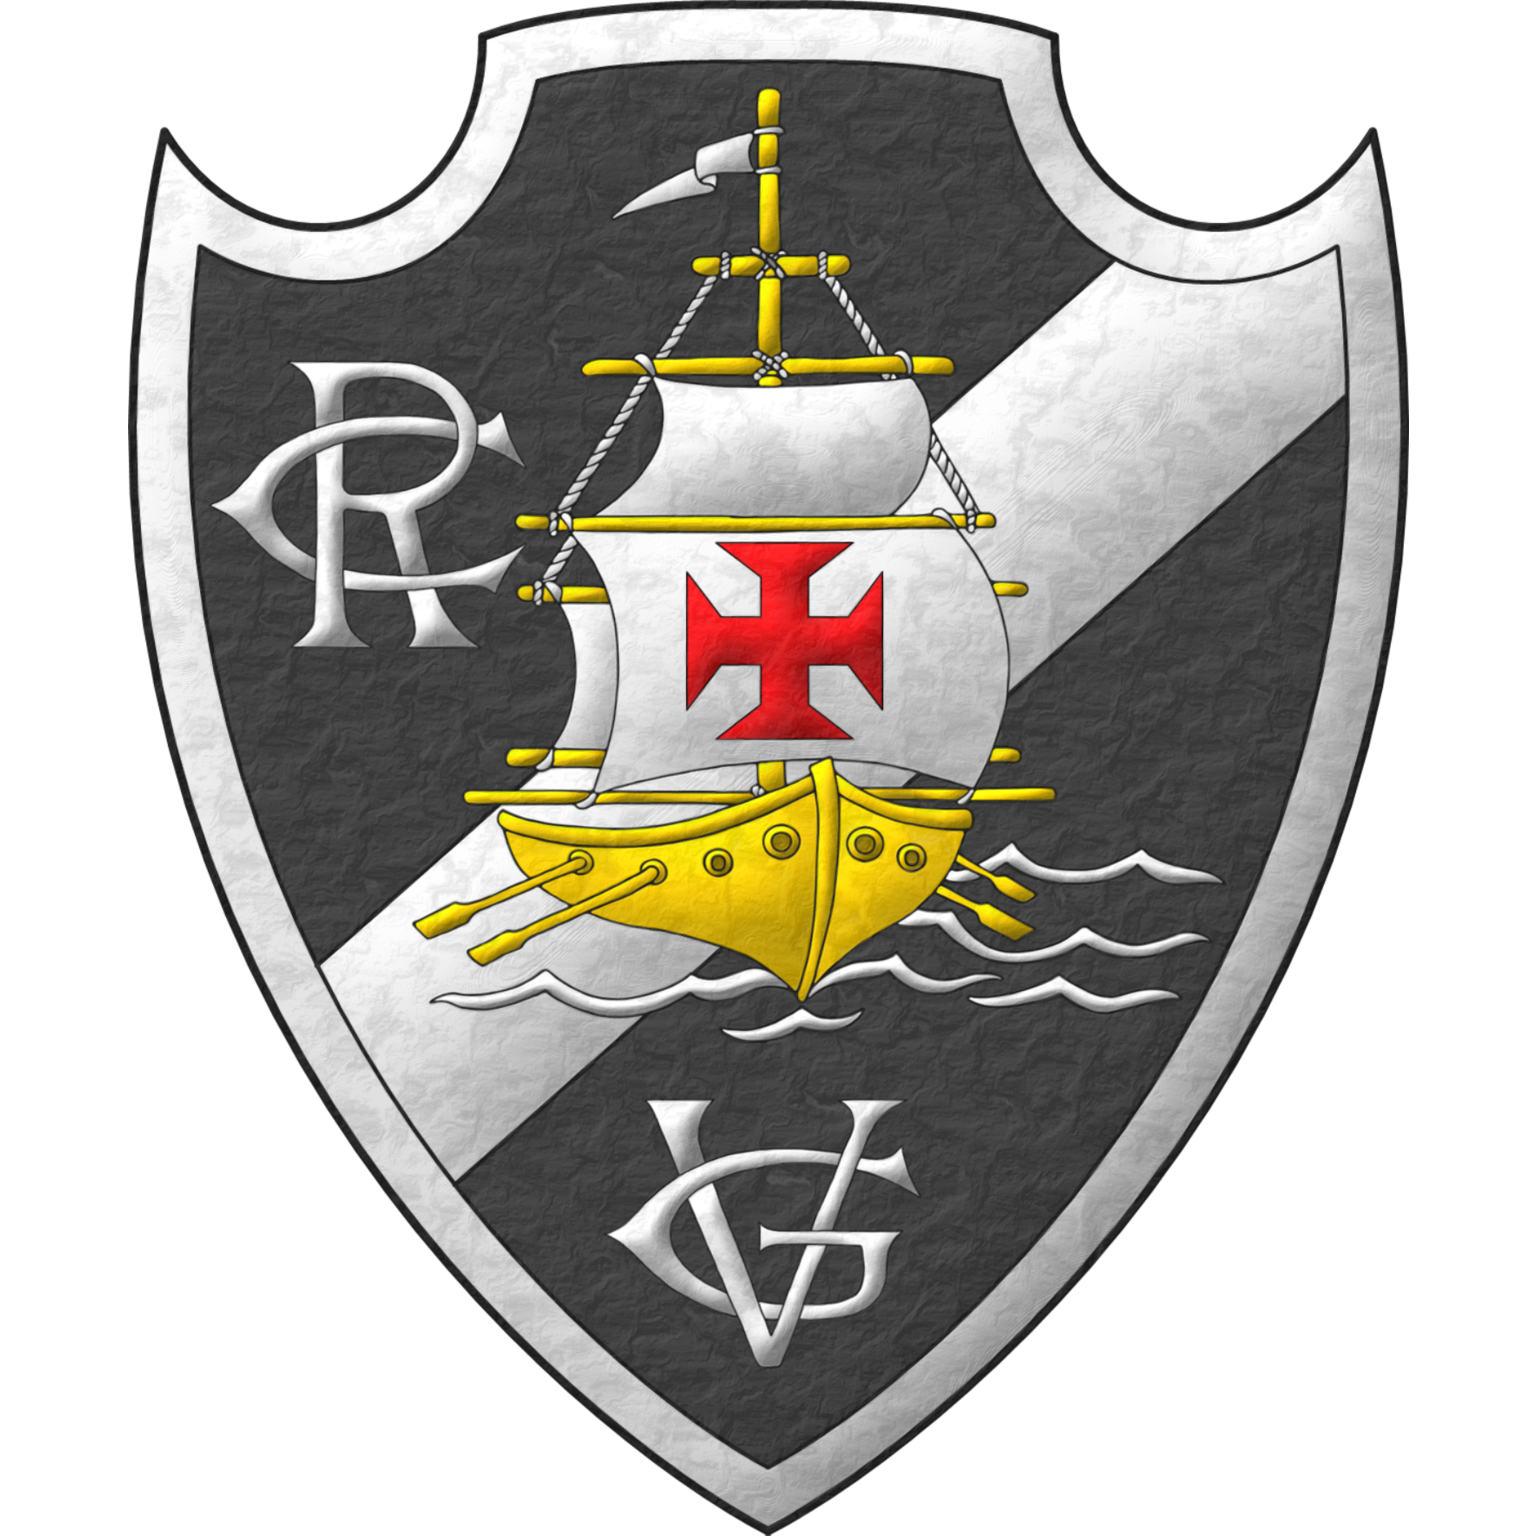 Sable, a bend sinister Argent debruised by a ship, oars in action Or, full sail, a pennant flying, cords, over the waves of the sea Argent, its mainsail charged with a cross patty Gules, between, in the dexter of the chief, a monogram RC, in the base a monogram VG, all within a bordure Argent.